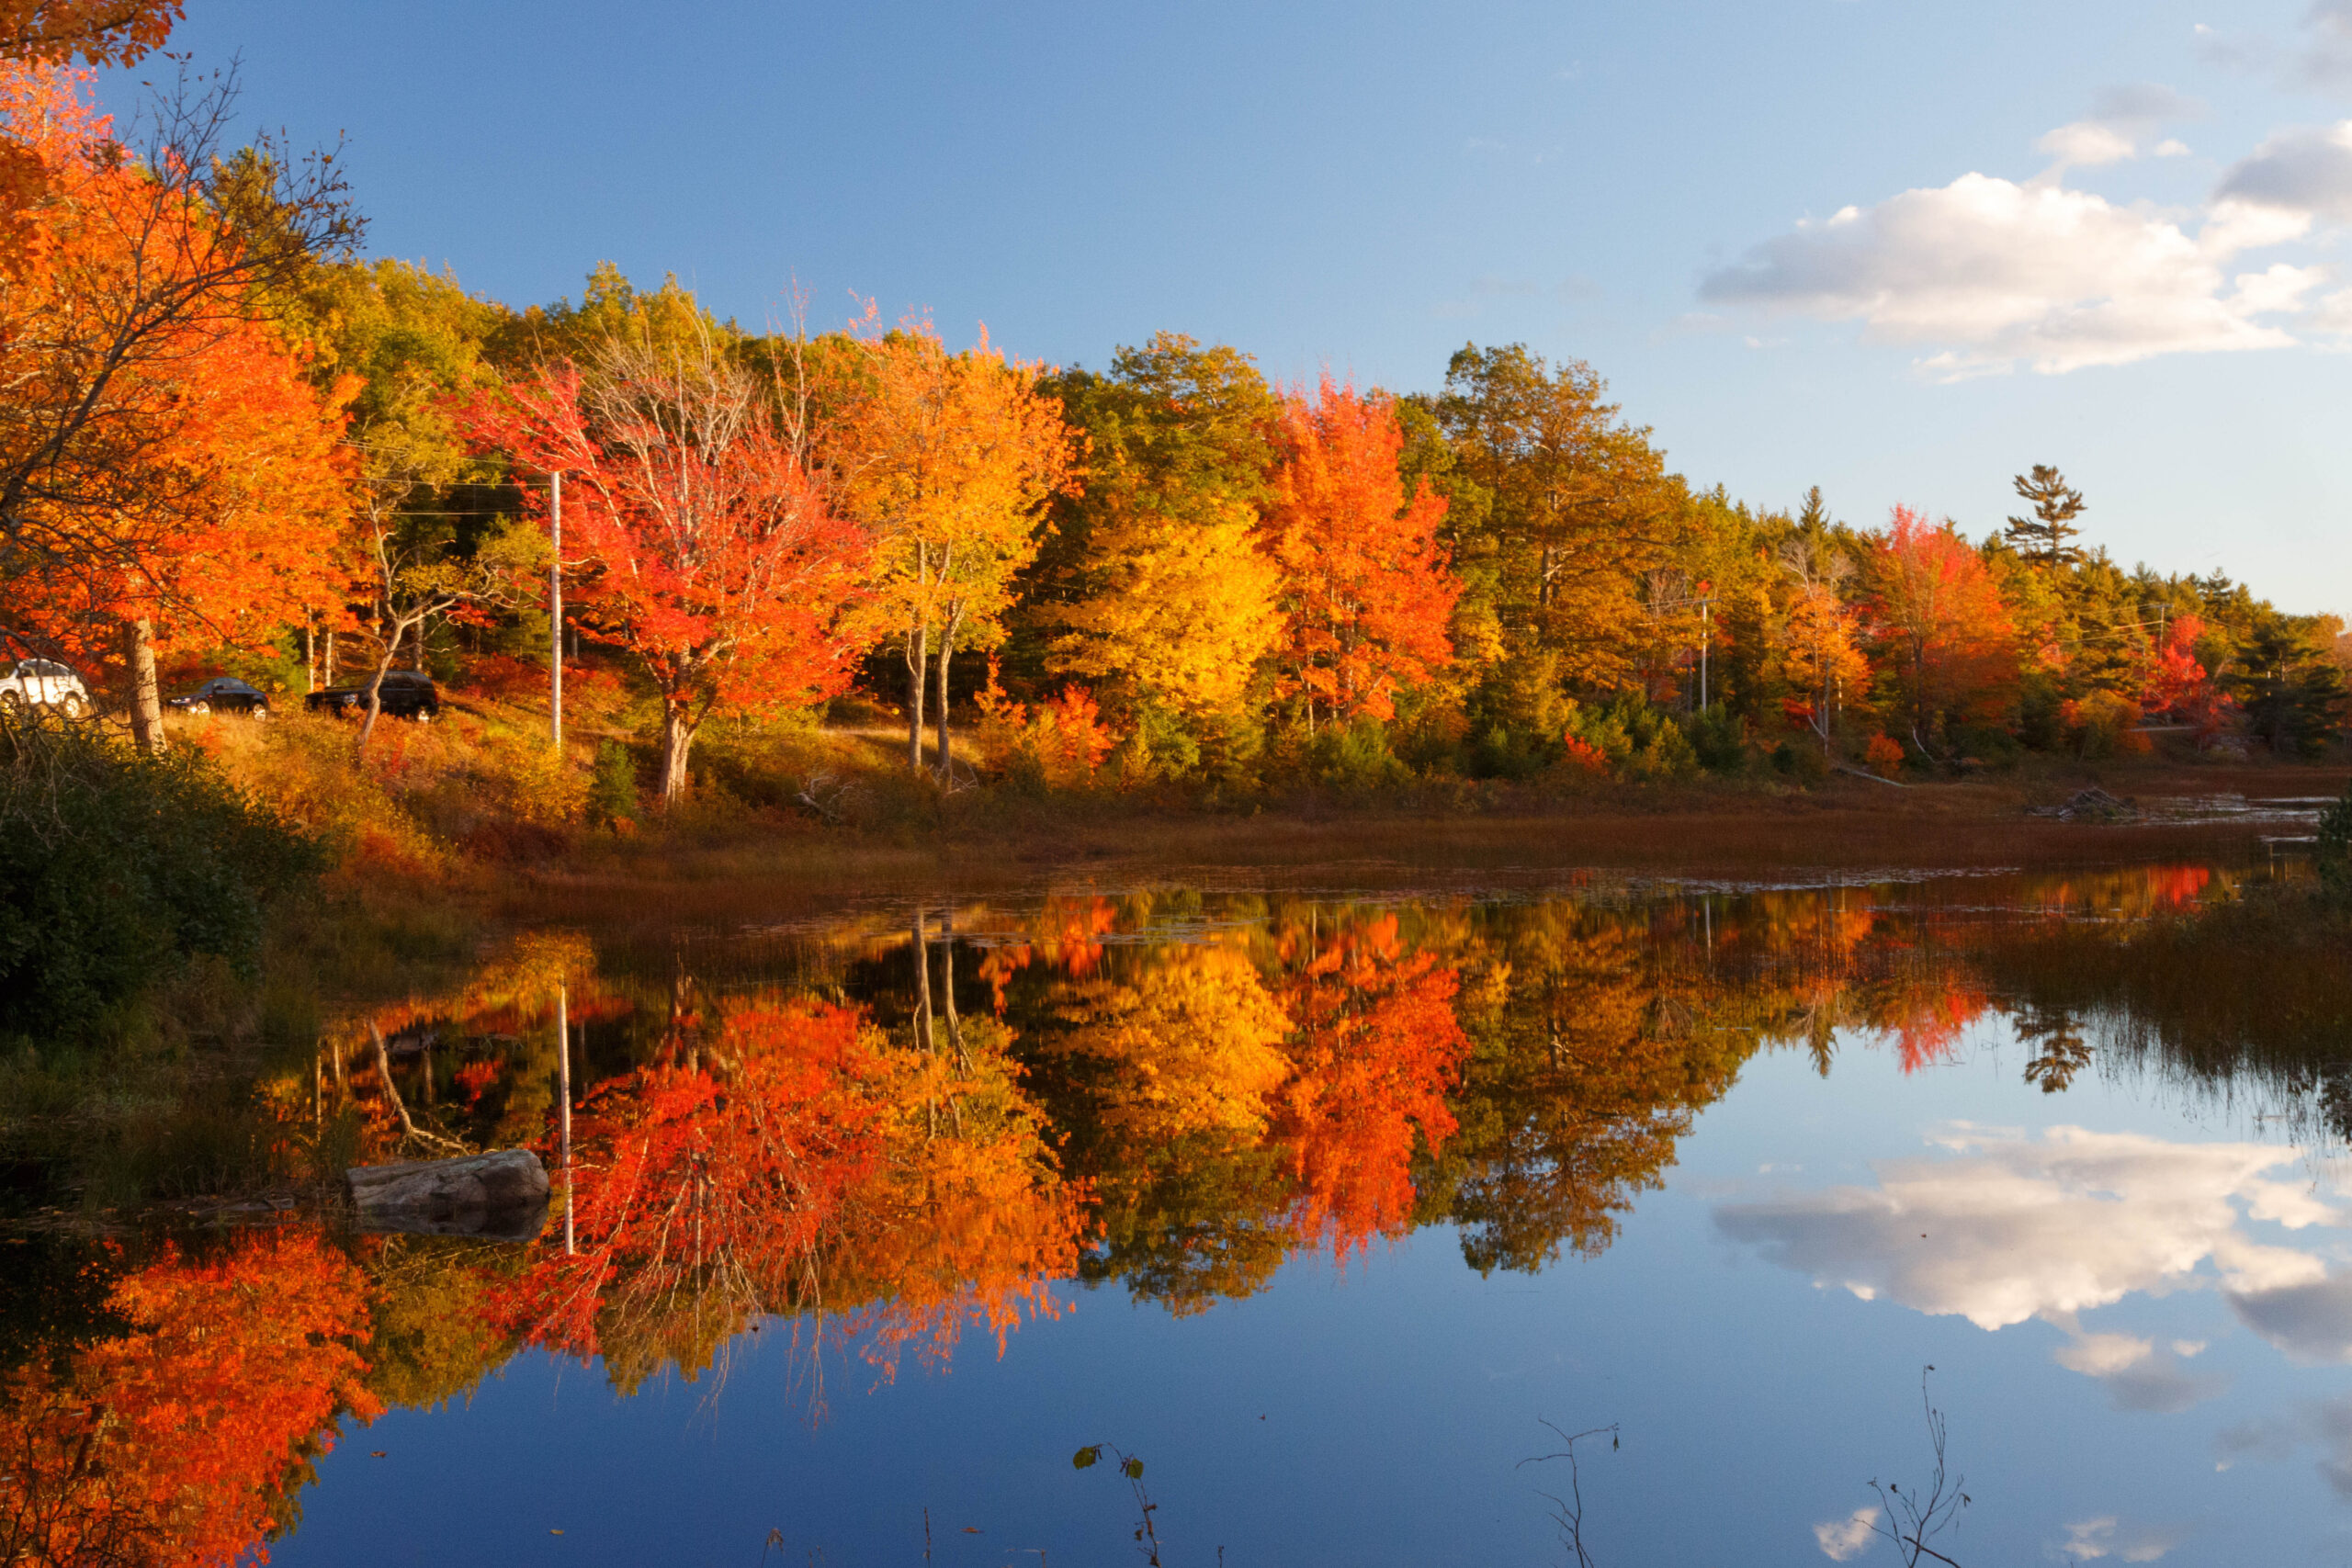 Acadia National Park in Maine (Photo Credit: Barbara Barbour / Shutterstock)